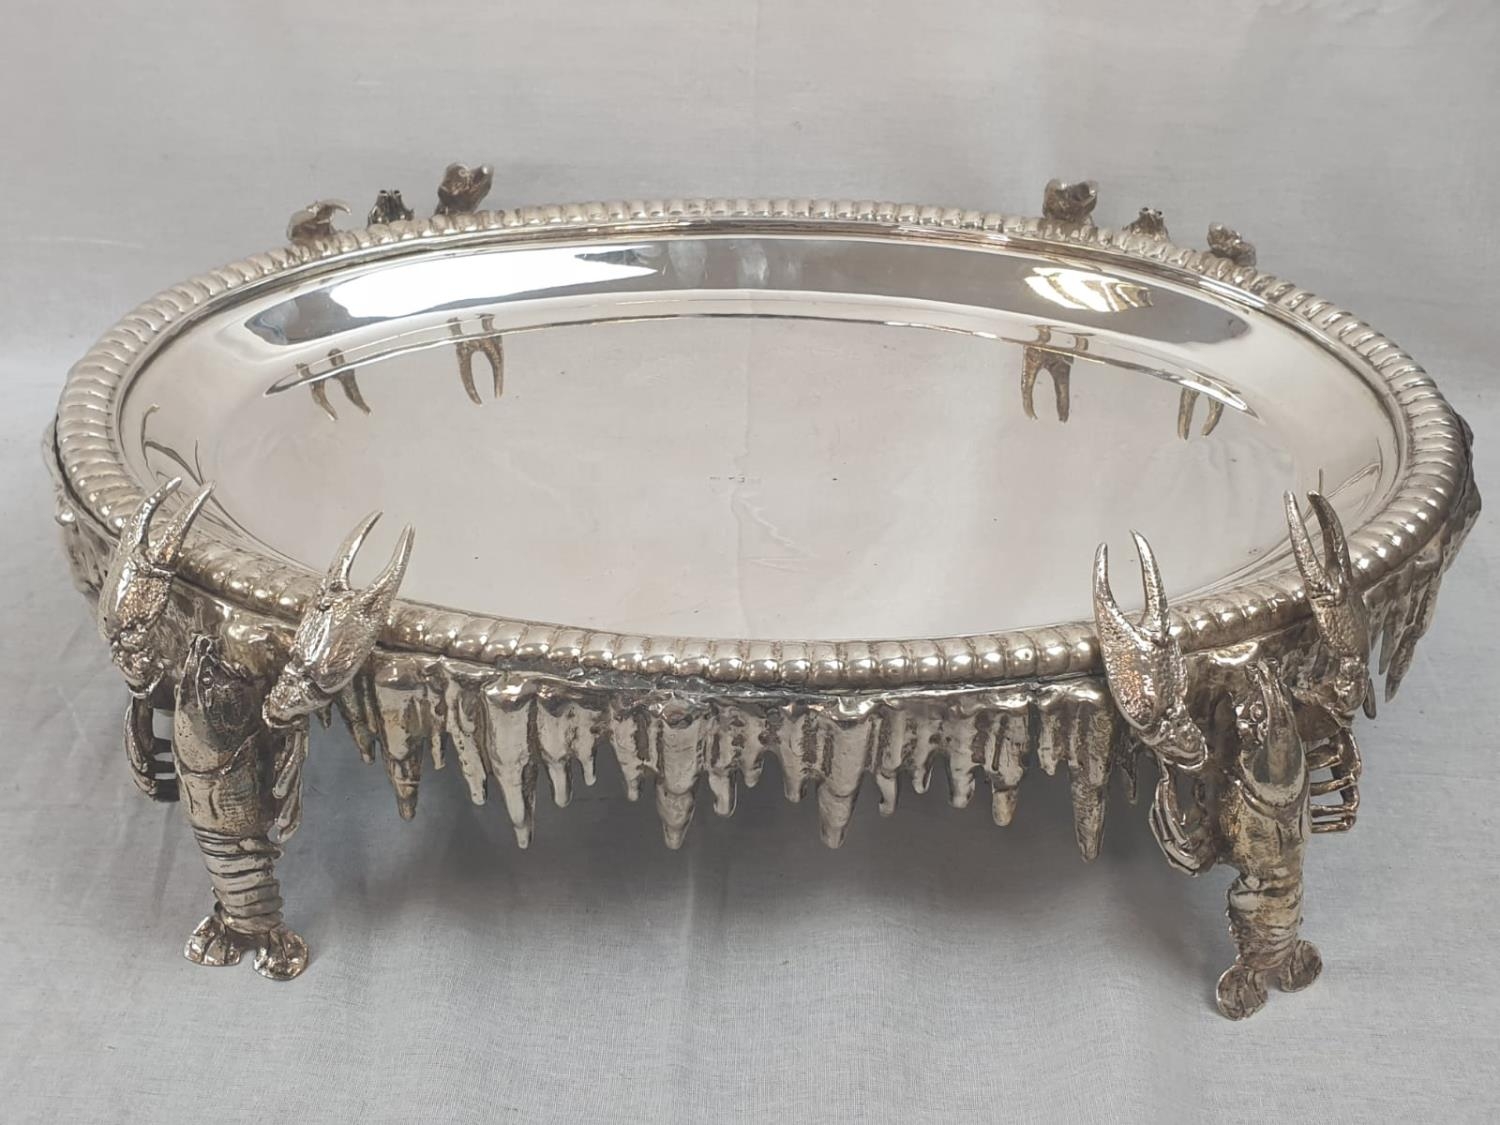 A VERY RARE SPANISH SILVER LOBSTER SERVING TRAY CIRCA 1920 , 4.2KG AND 50 X 35 CMS. AN INTERESTING